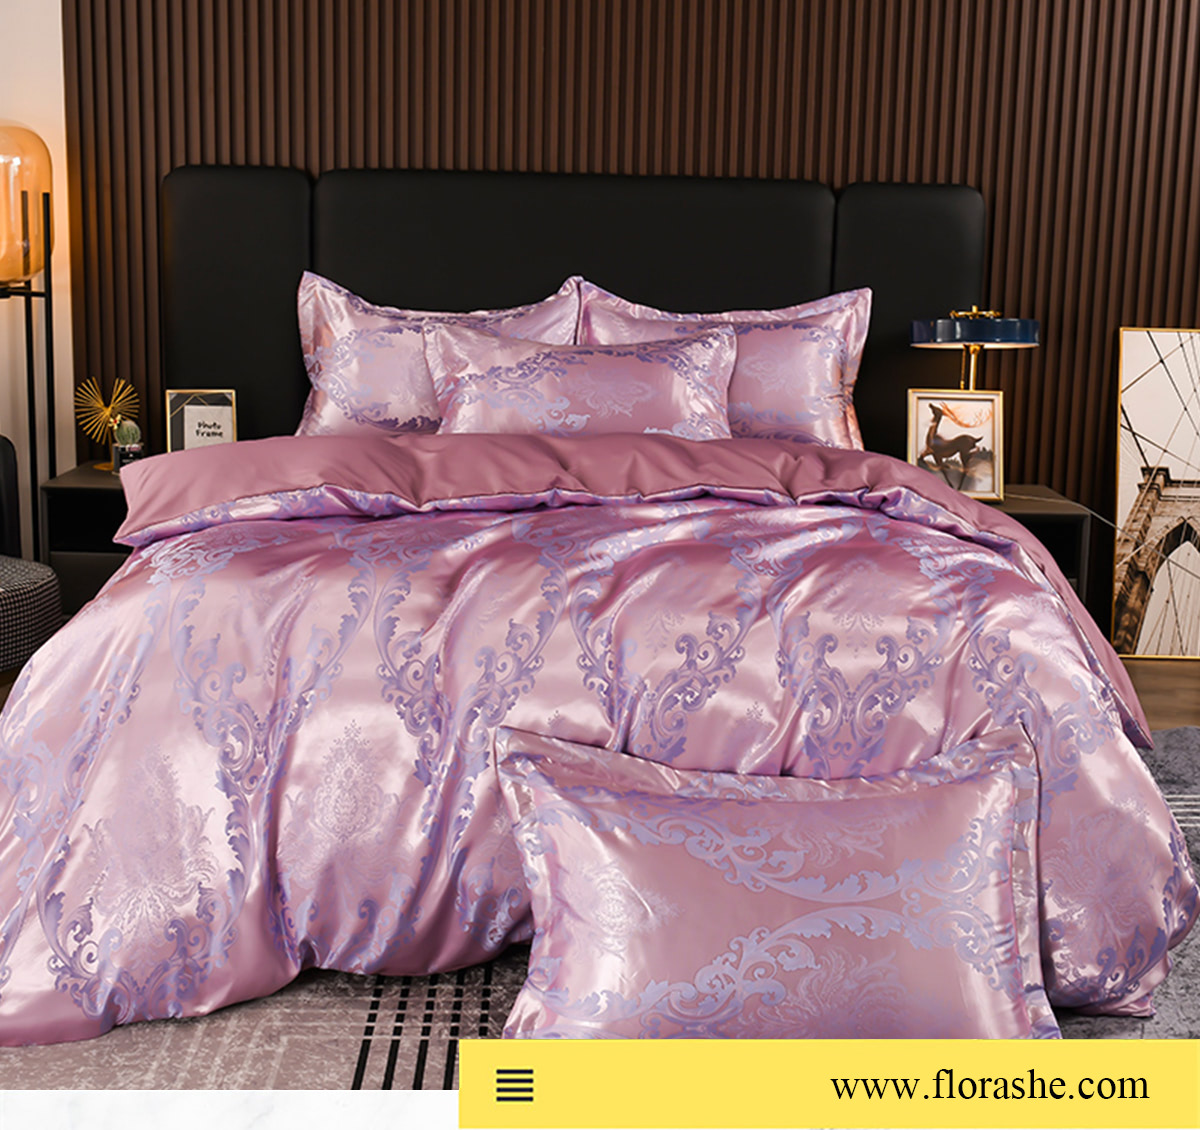 Beautiful-Floral-Jacquard-Satin-Bedding-Set-Full-Queen-King-Size21